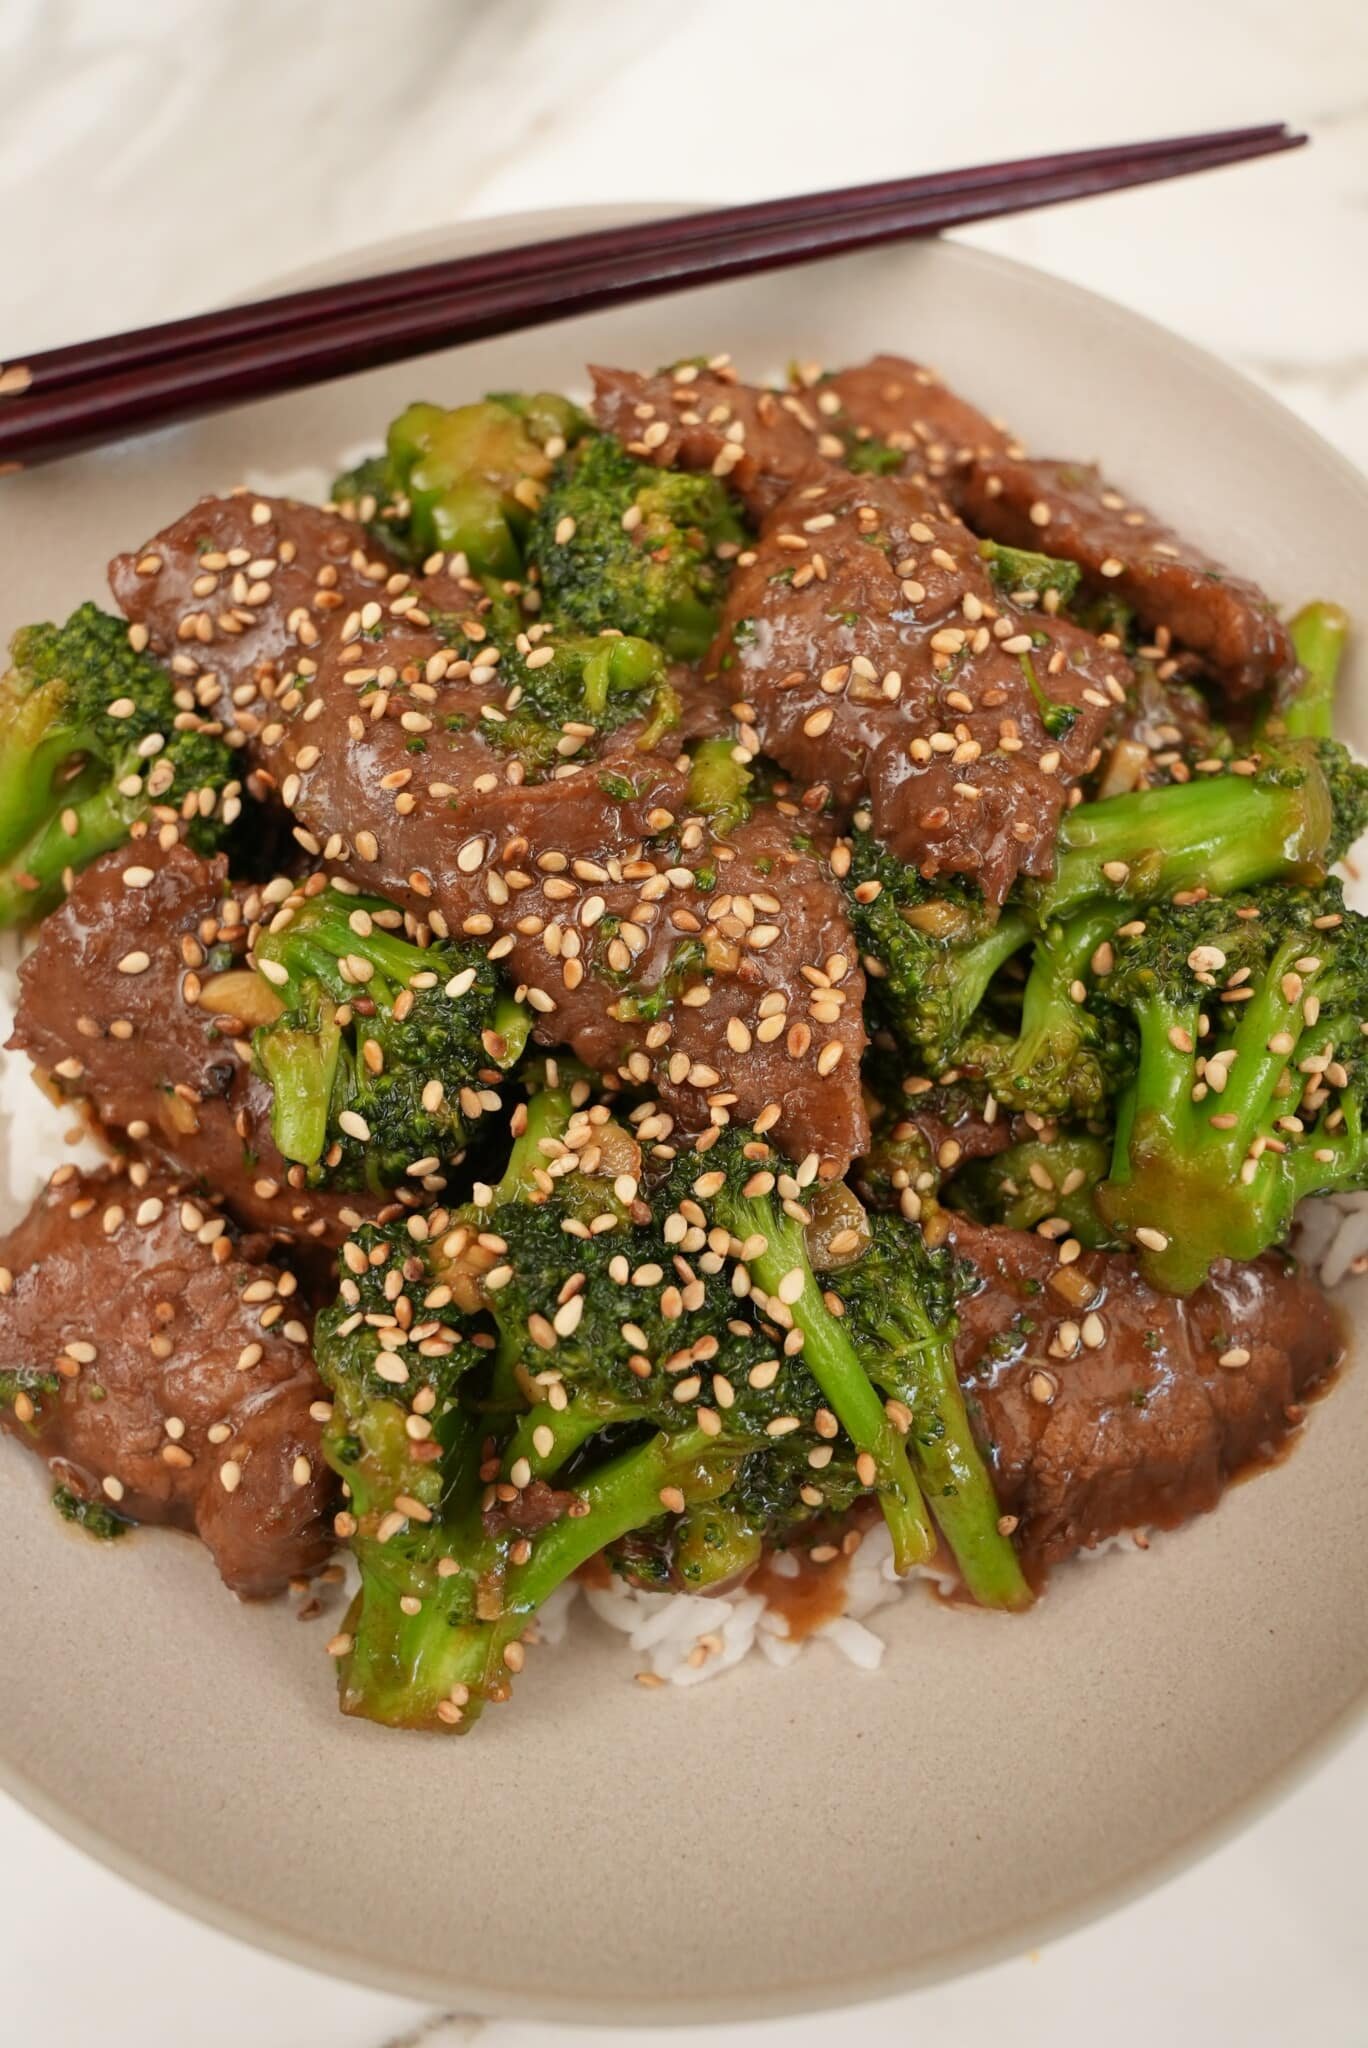 https://cjeatsrecipes.com/wp-content/uploads/2022/05/Beef-and-Broccoli-Cover-scaled.jpg